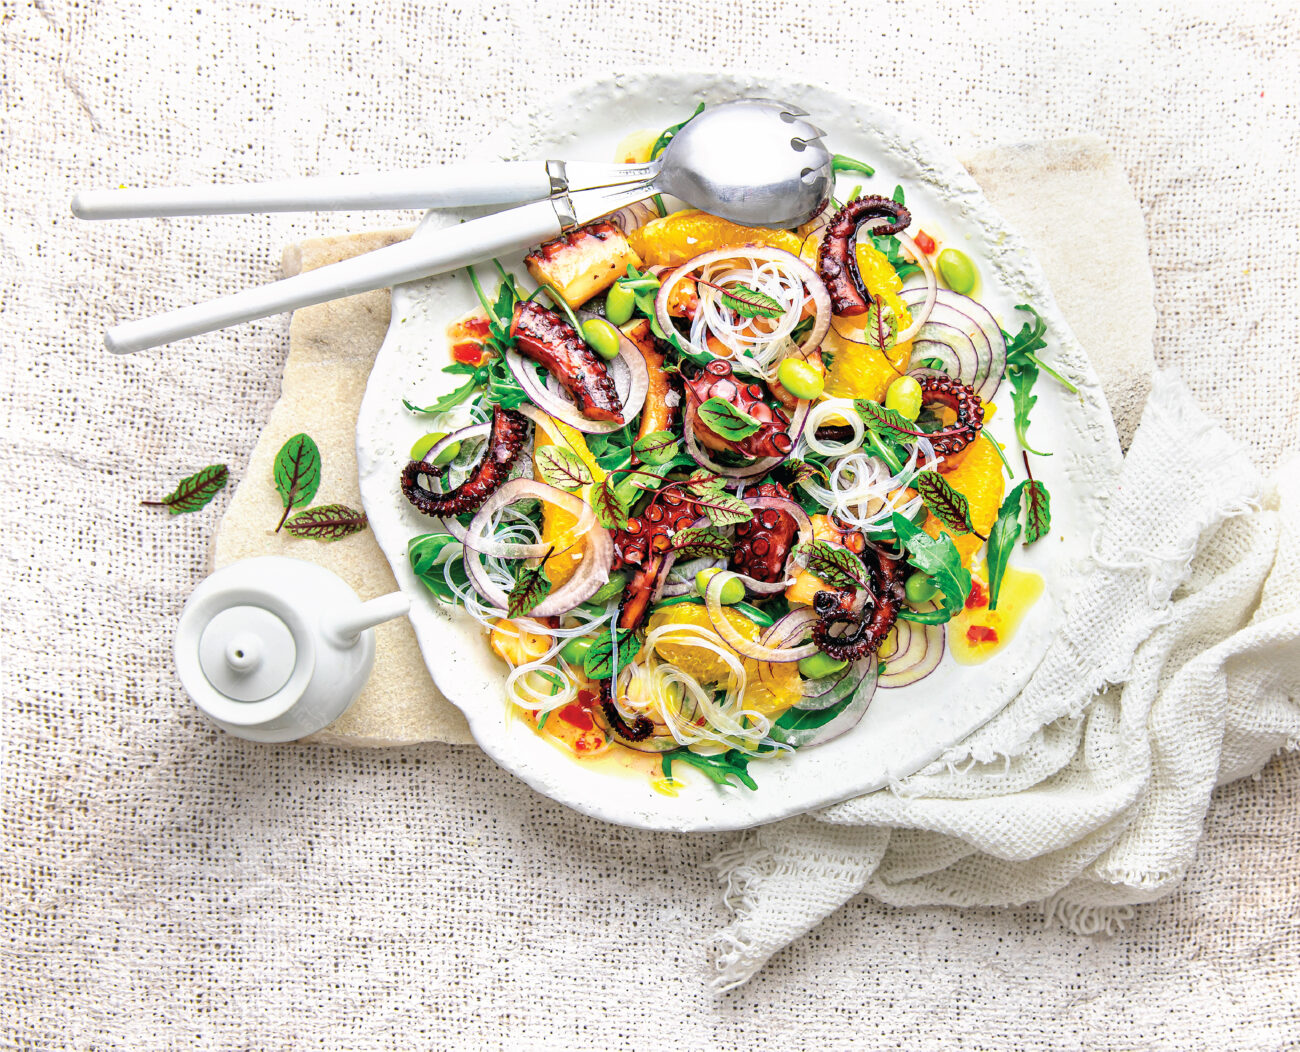 Octopus Salad with Chilli and Noodles